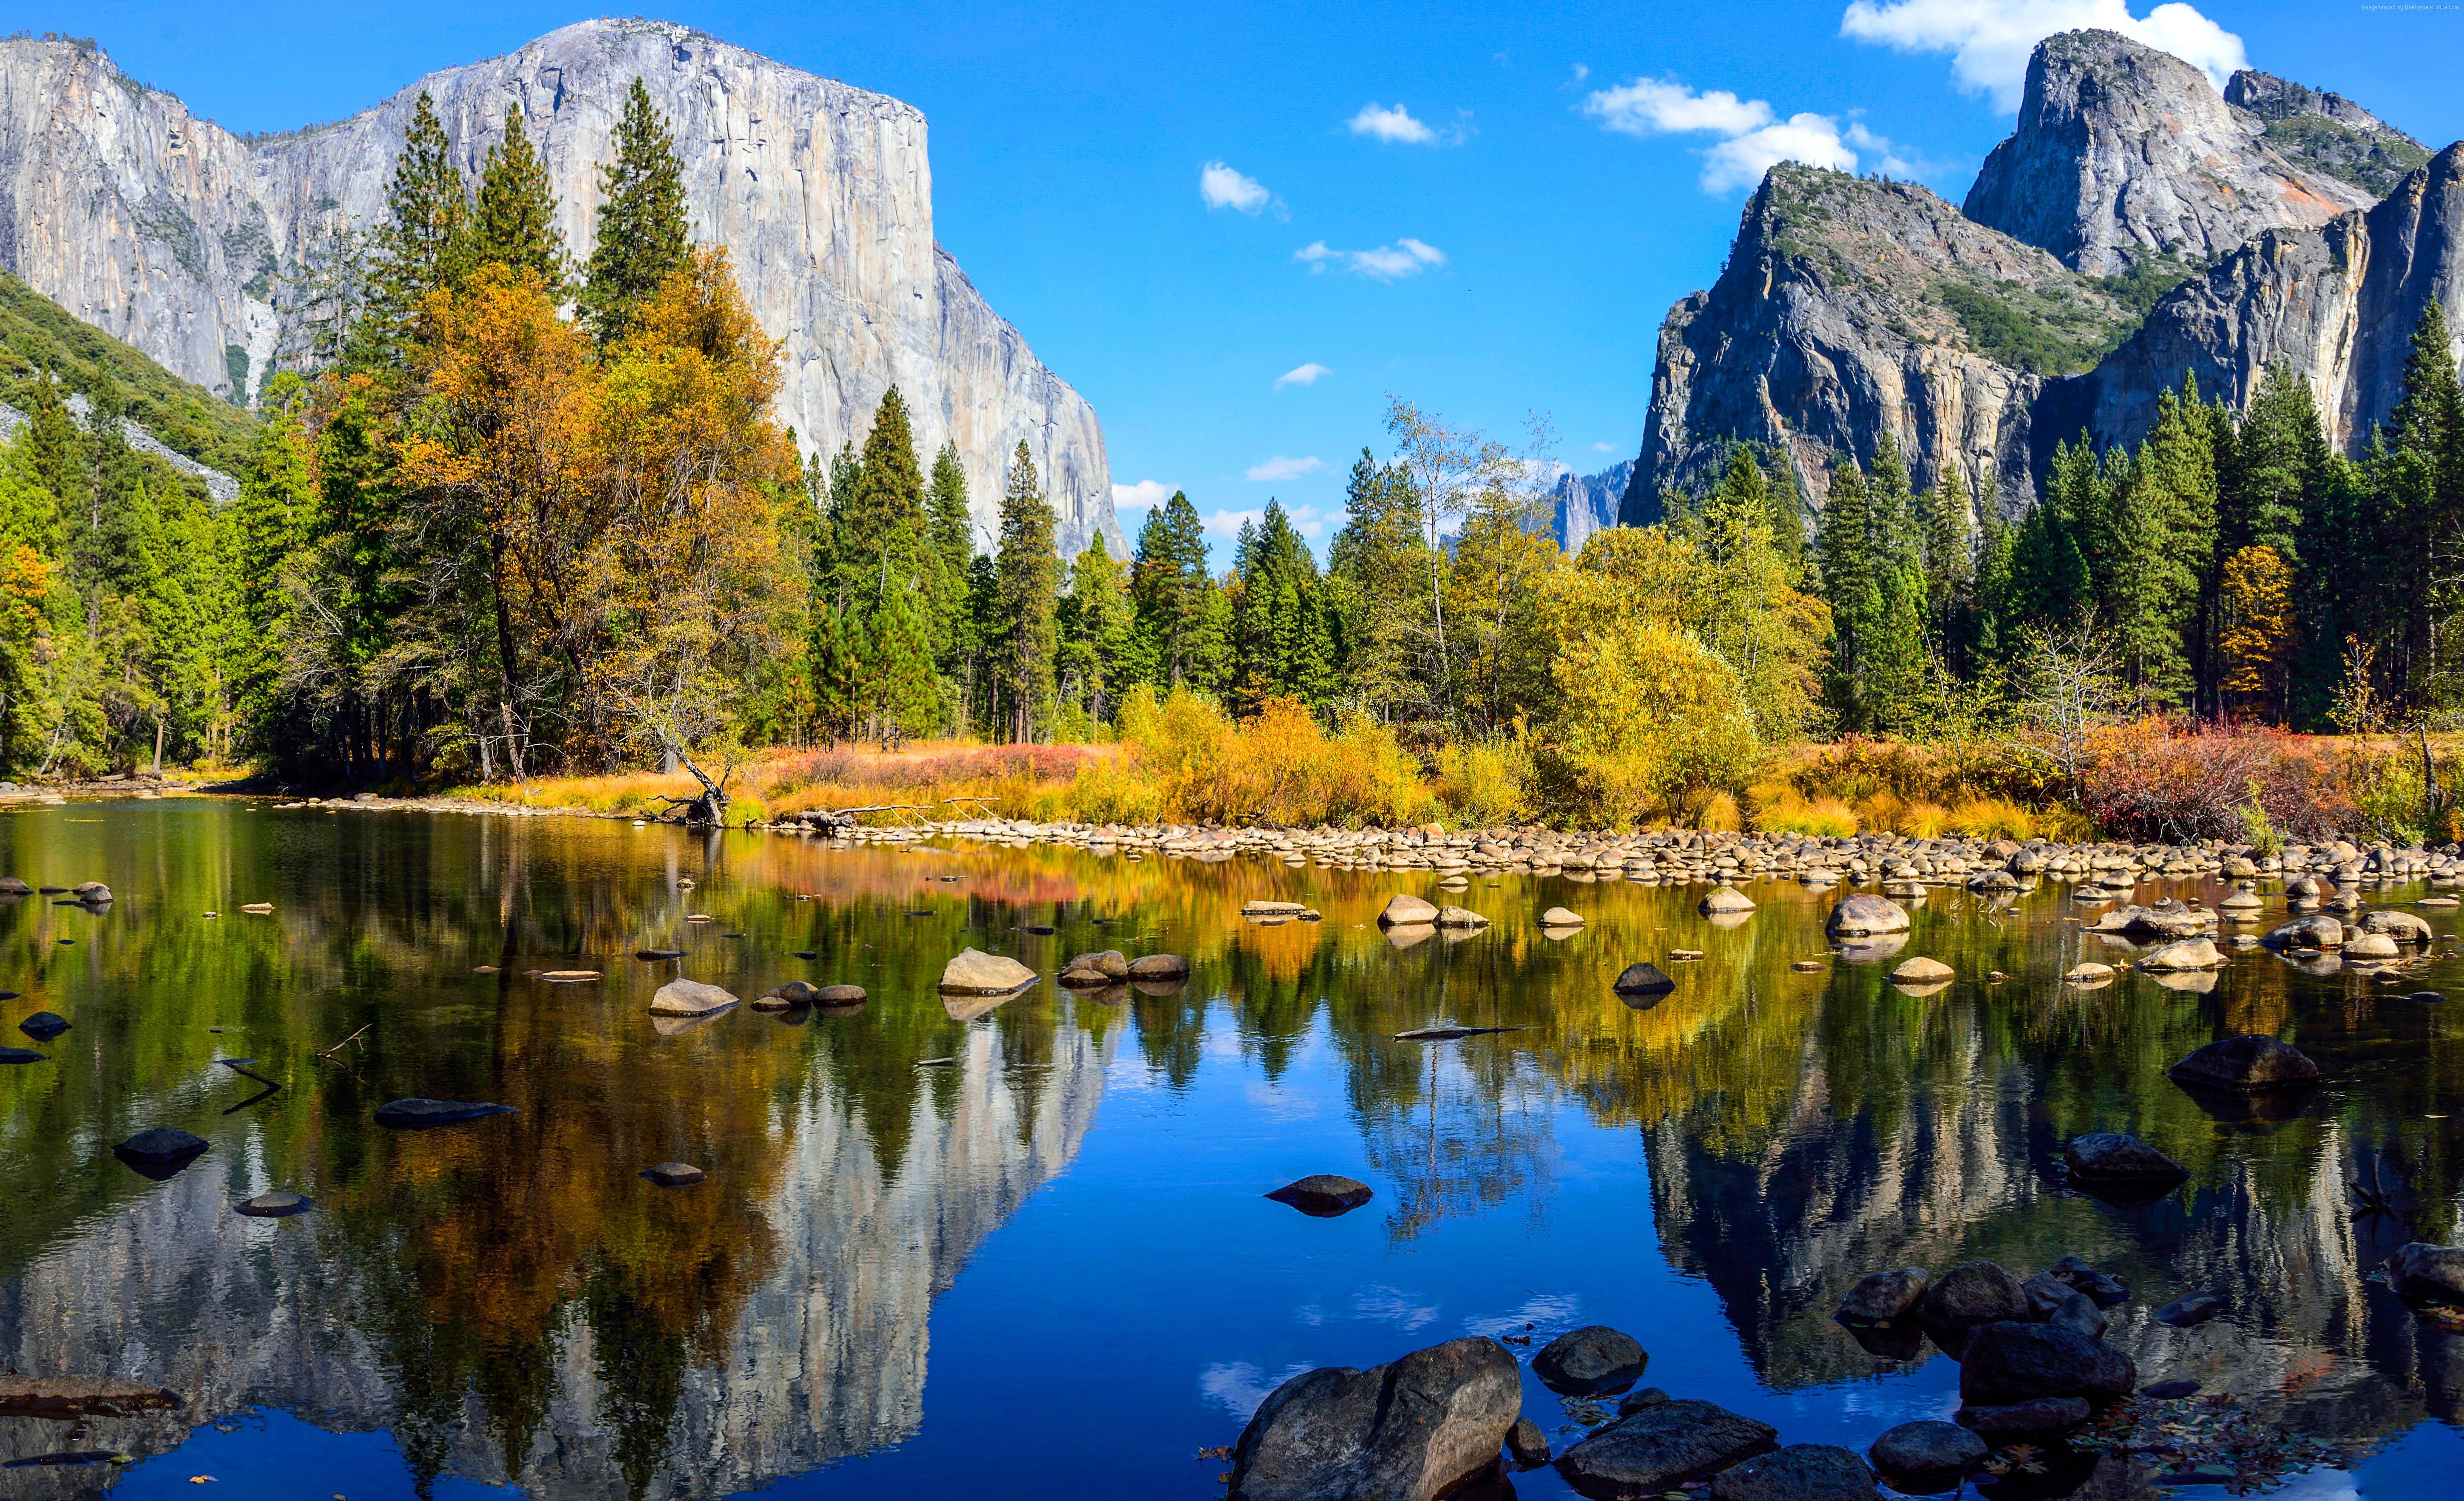  5k wallpapers El Capitan forest OSX apple mountains lake